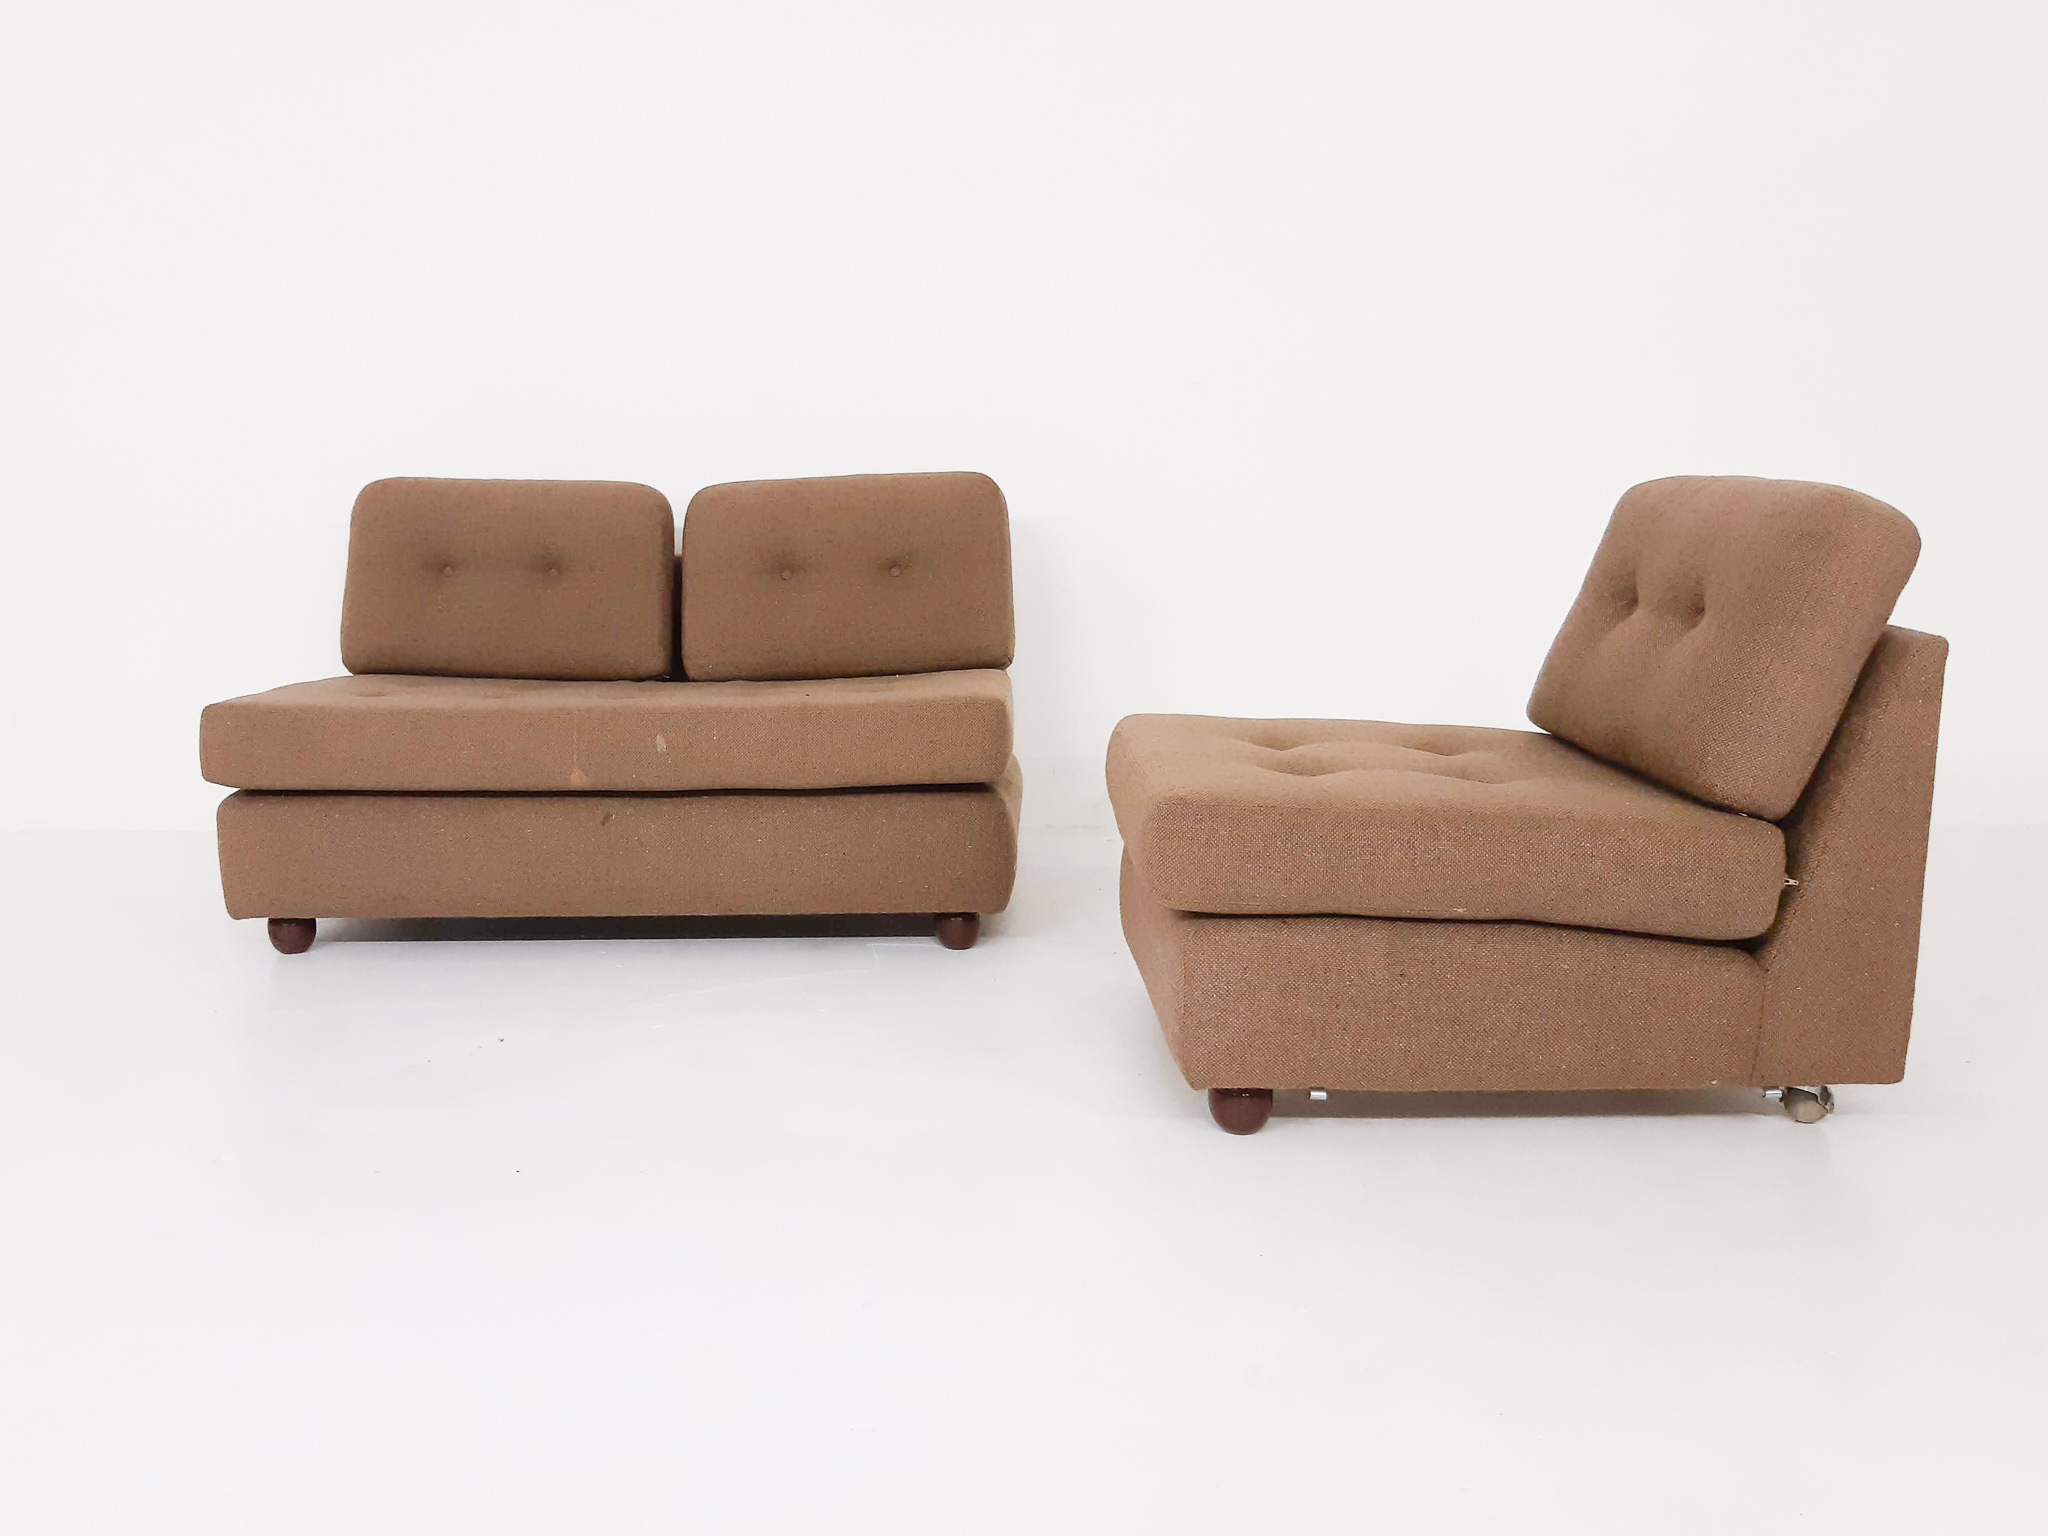 Sofas | Goed Seating Design Buy Zo Oud at Vintage Als